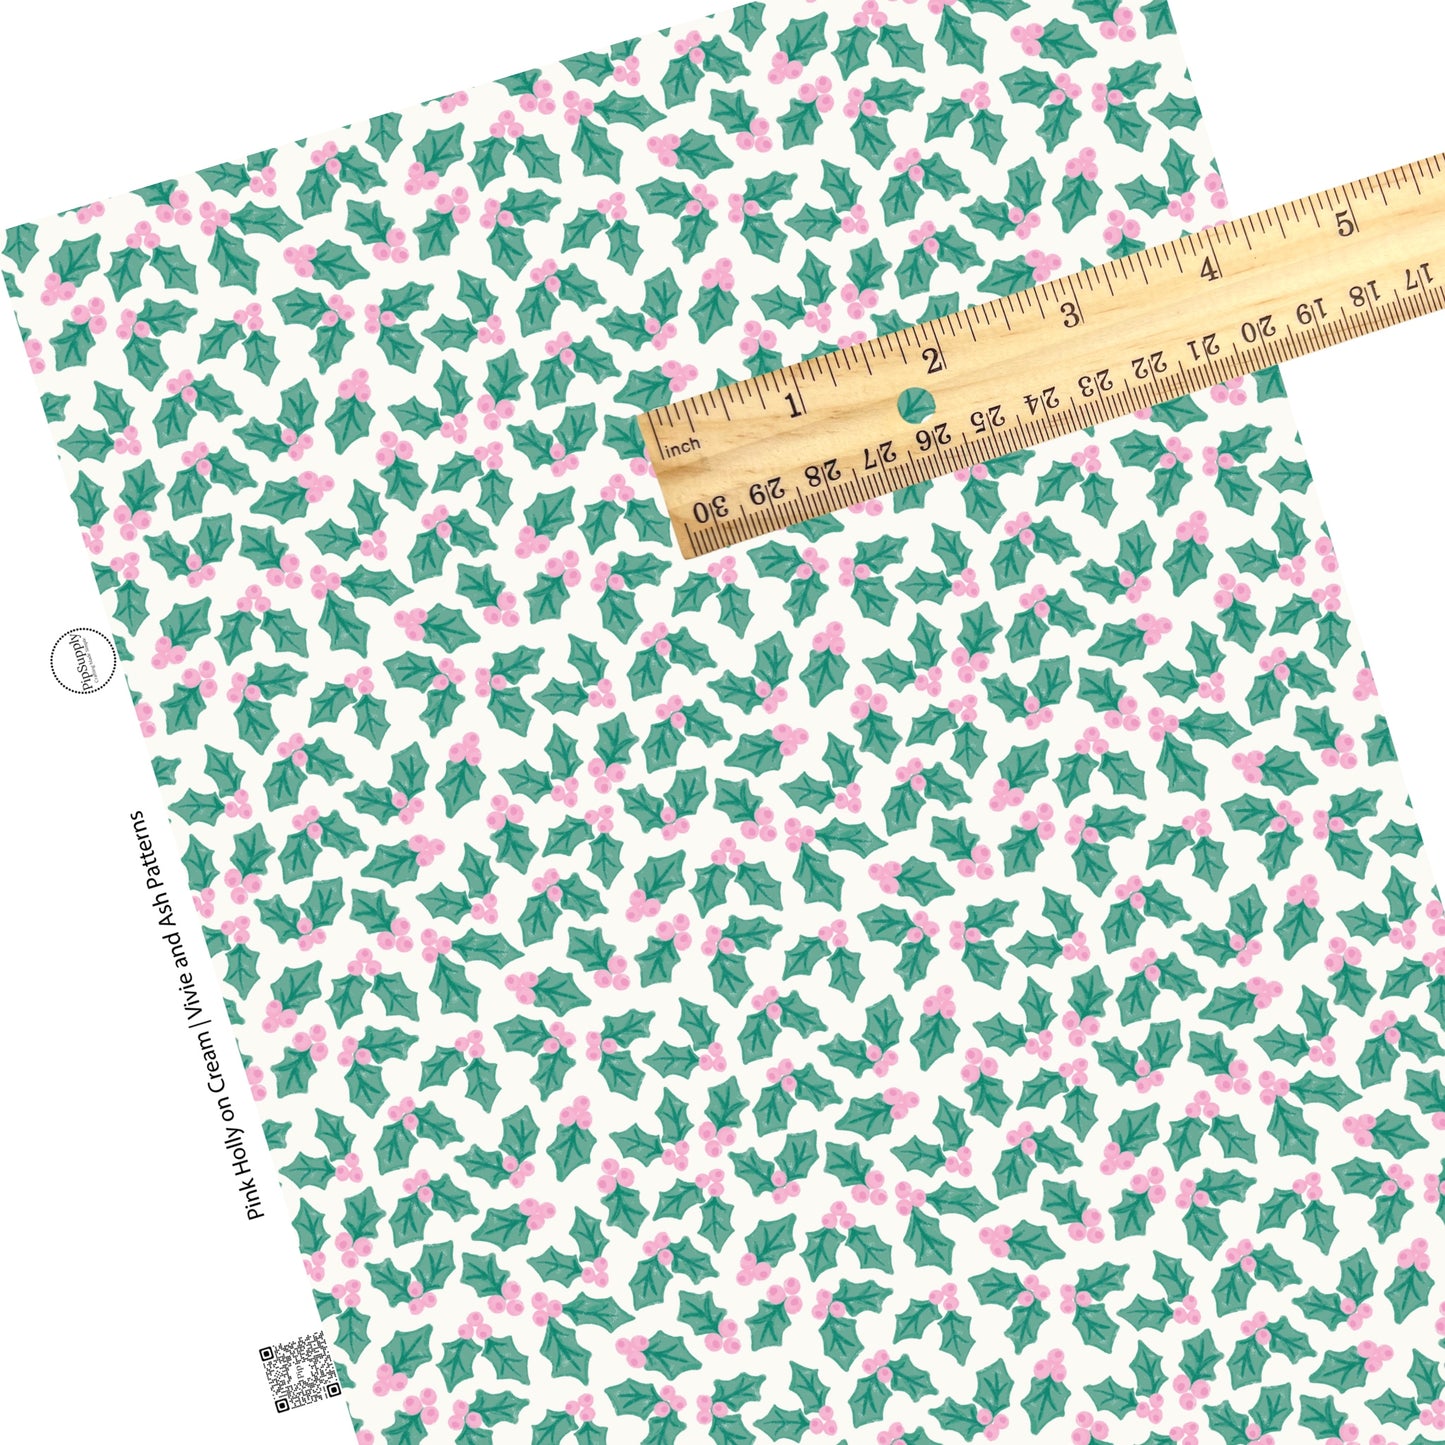 Green holly leaves and pink berries on cream faux leather sheets